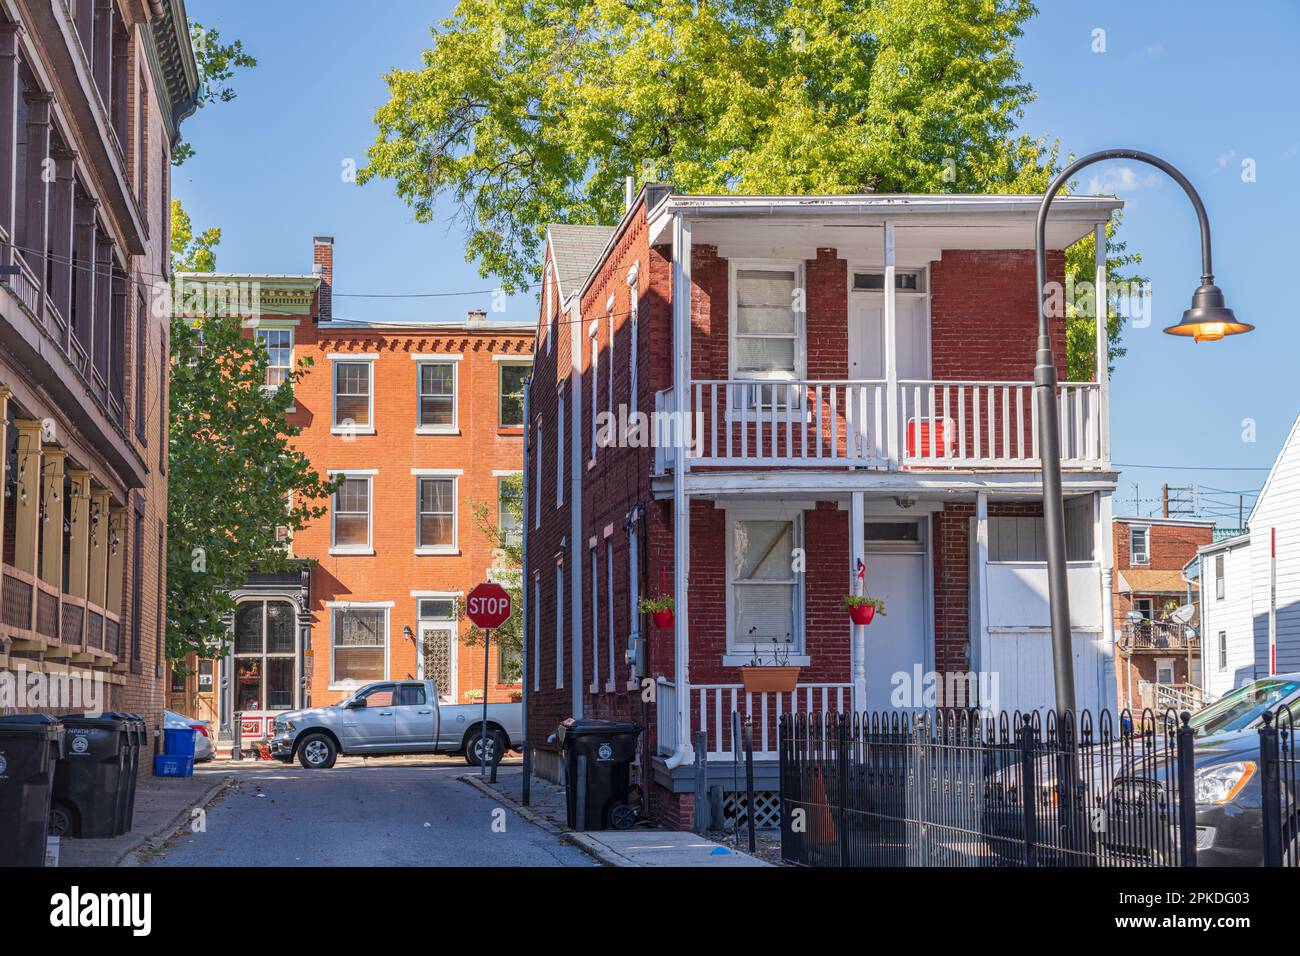 Harrisburg, PA - Sept 26, 2021: Quaint alley with a view of brick buildings typical of the city architecture Harrisburg, Pennsylvania, USA Stock Photo